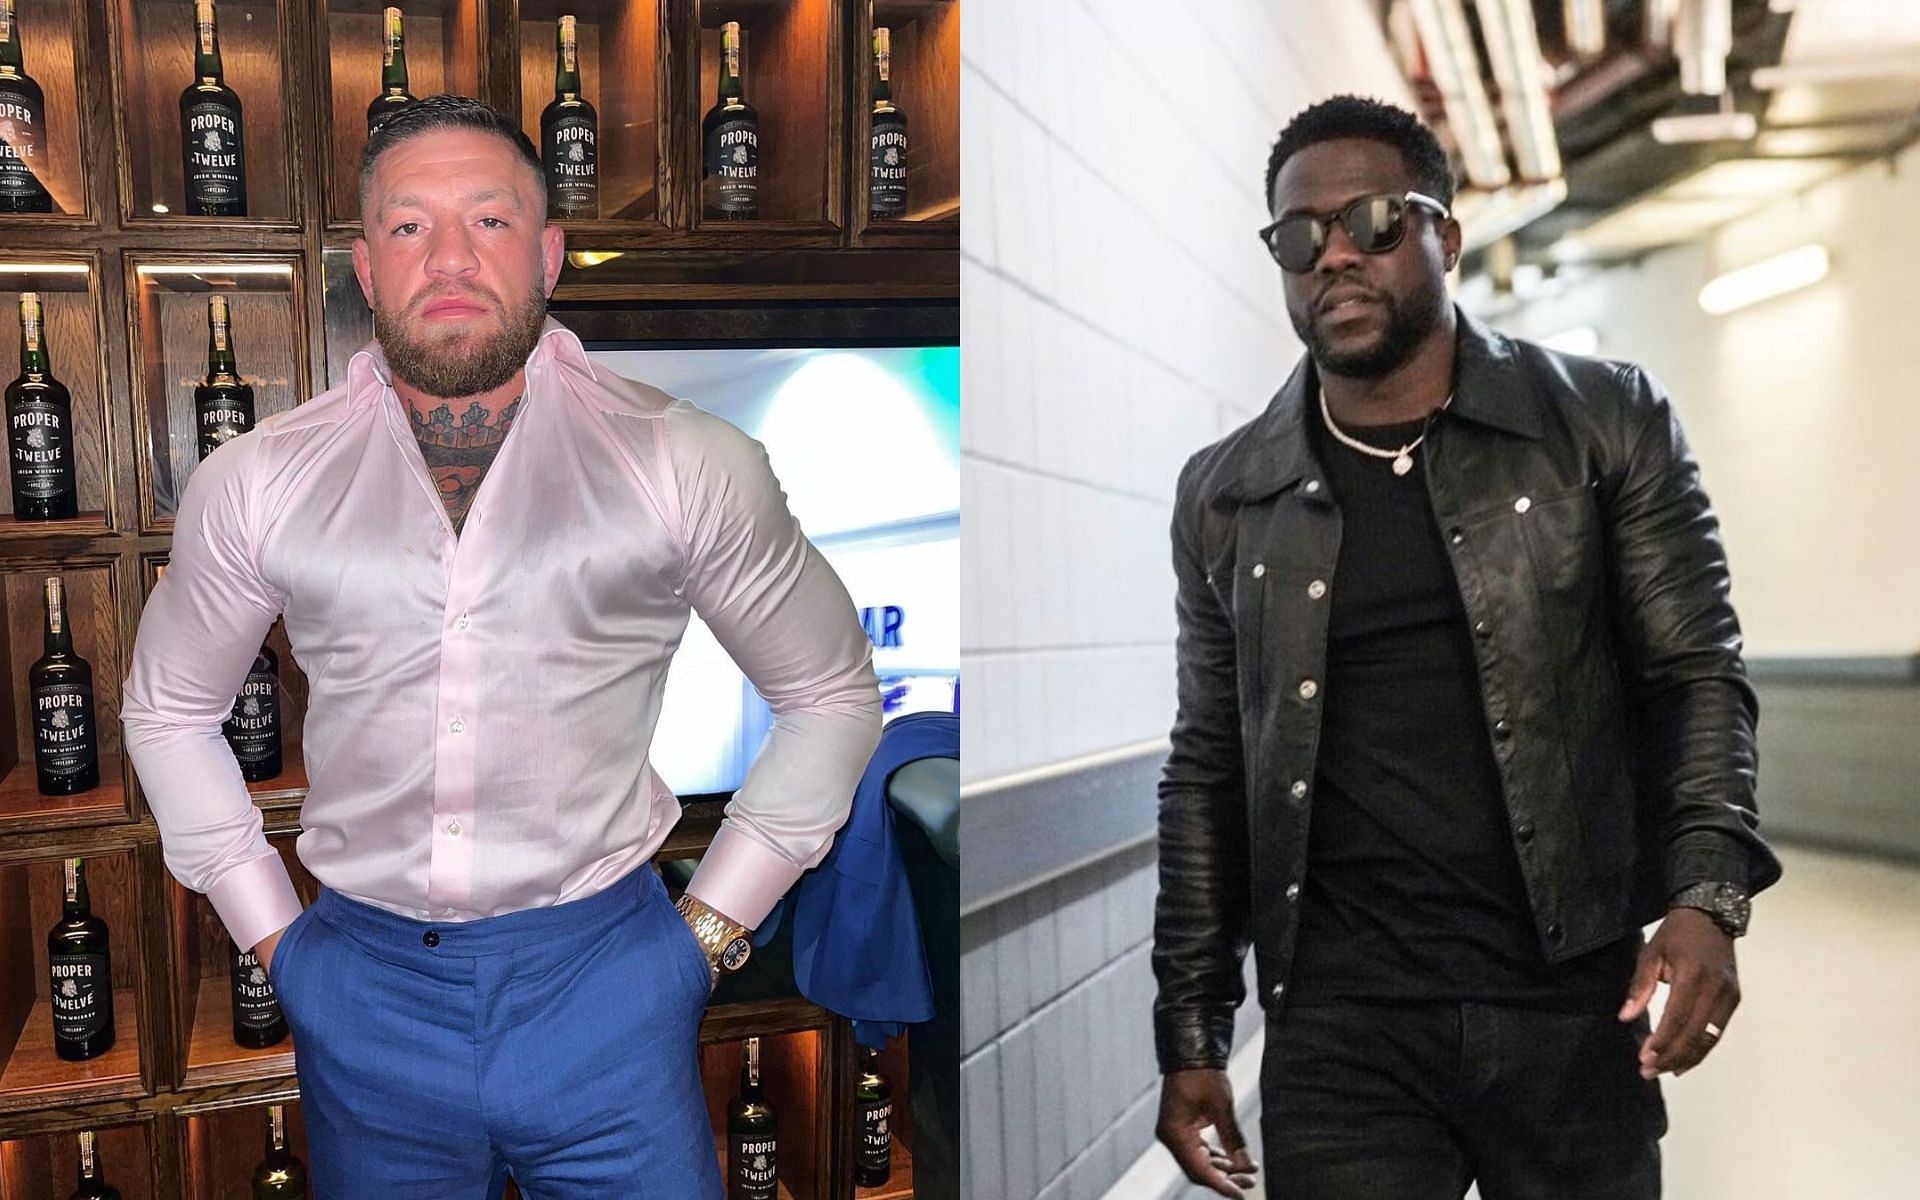 Conor McGregor (L) and Kevin Hart (R) (via @thenotoriousmma and @kevinhart4real on Instagram)